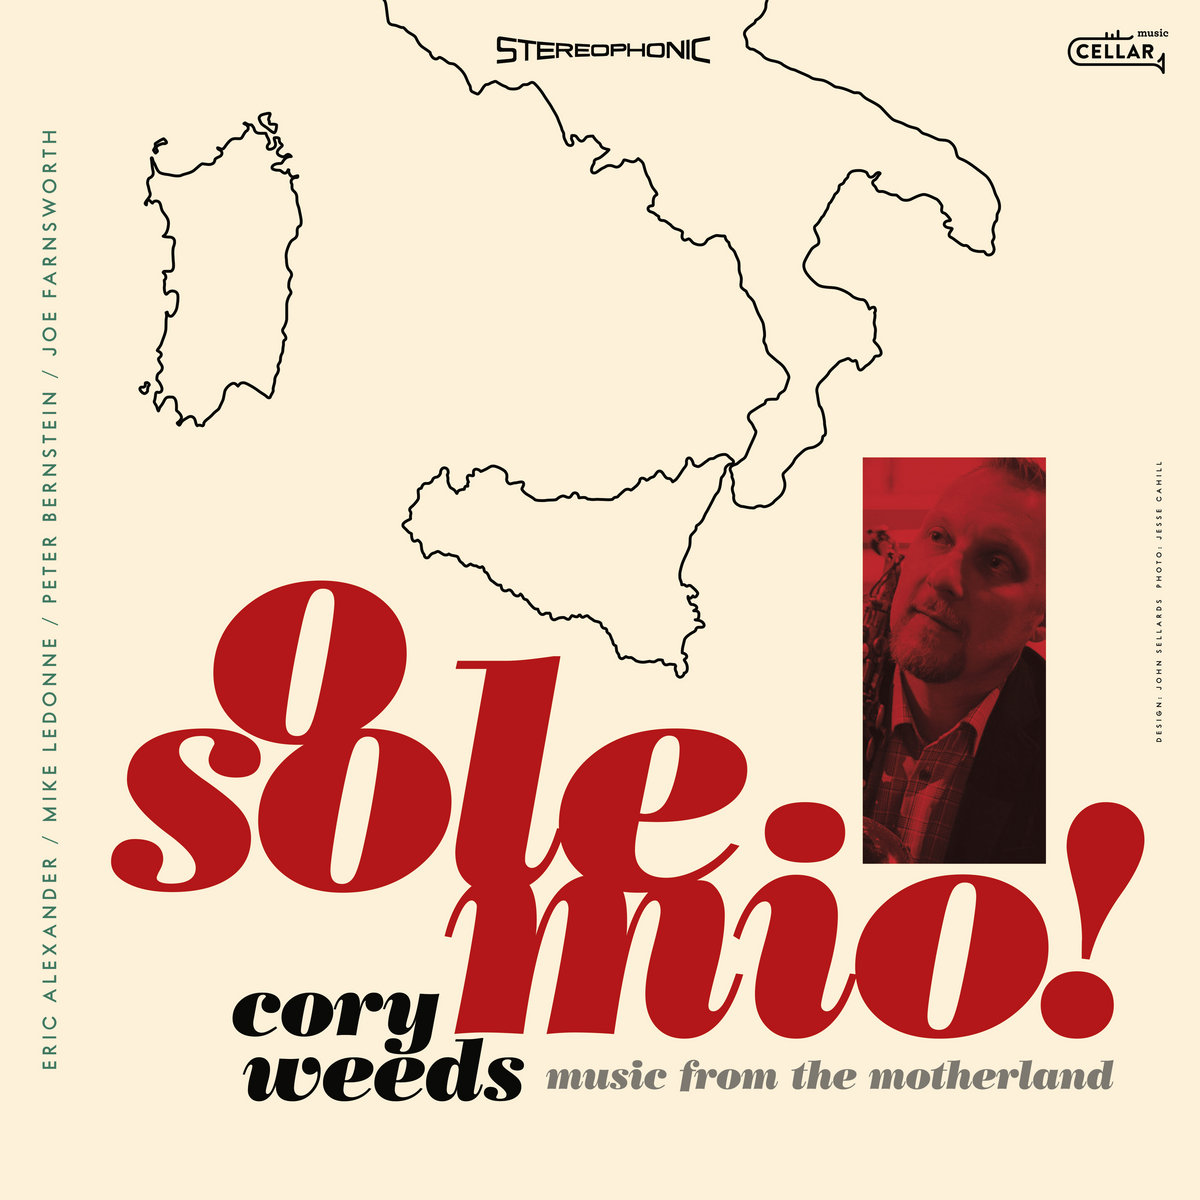 Cory Weeds / O Sole Mio! - music from the motherland